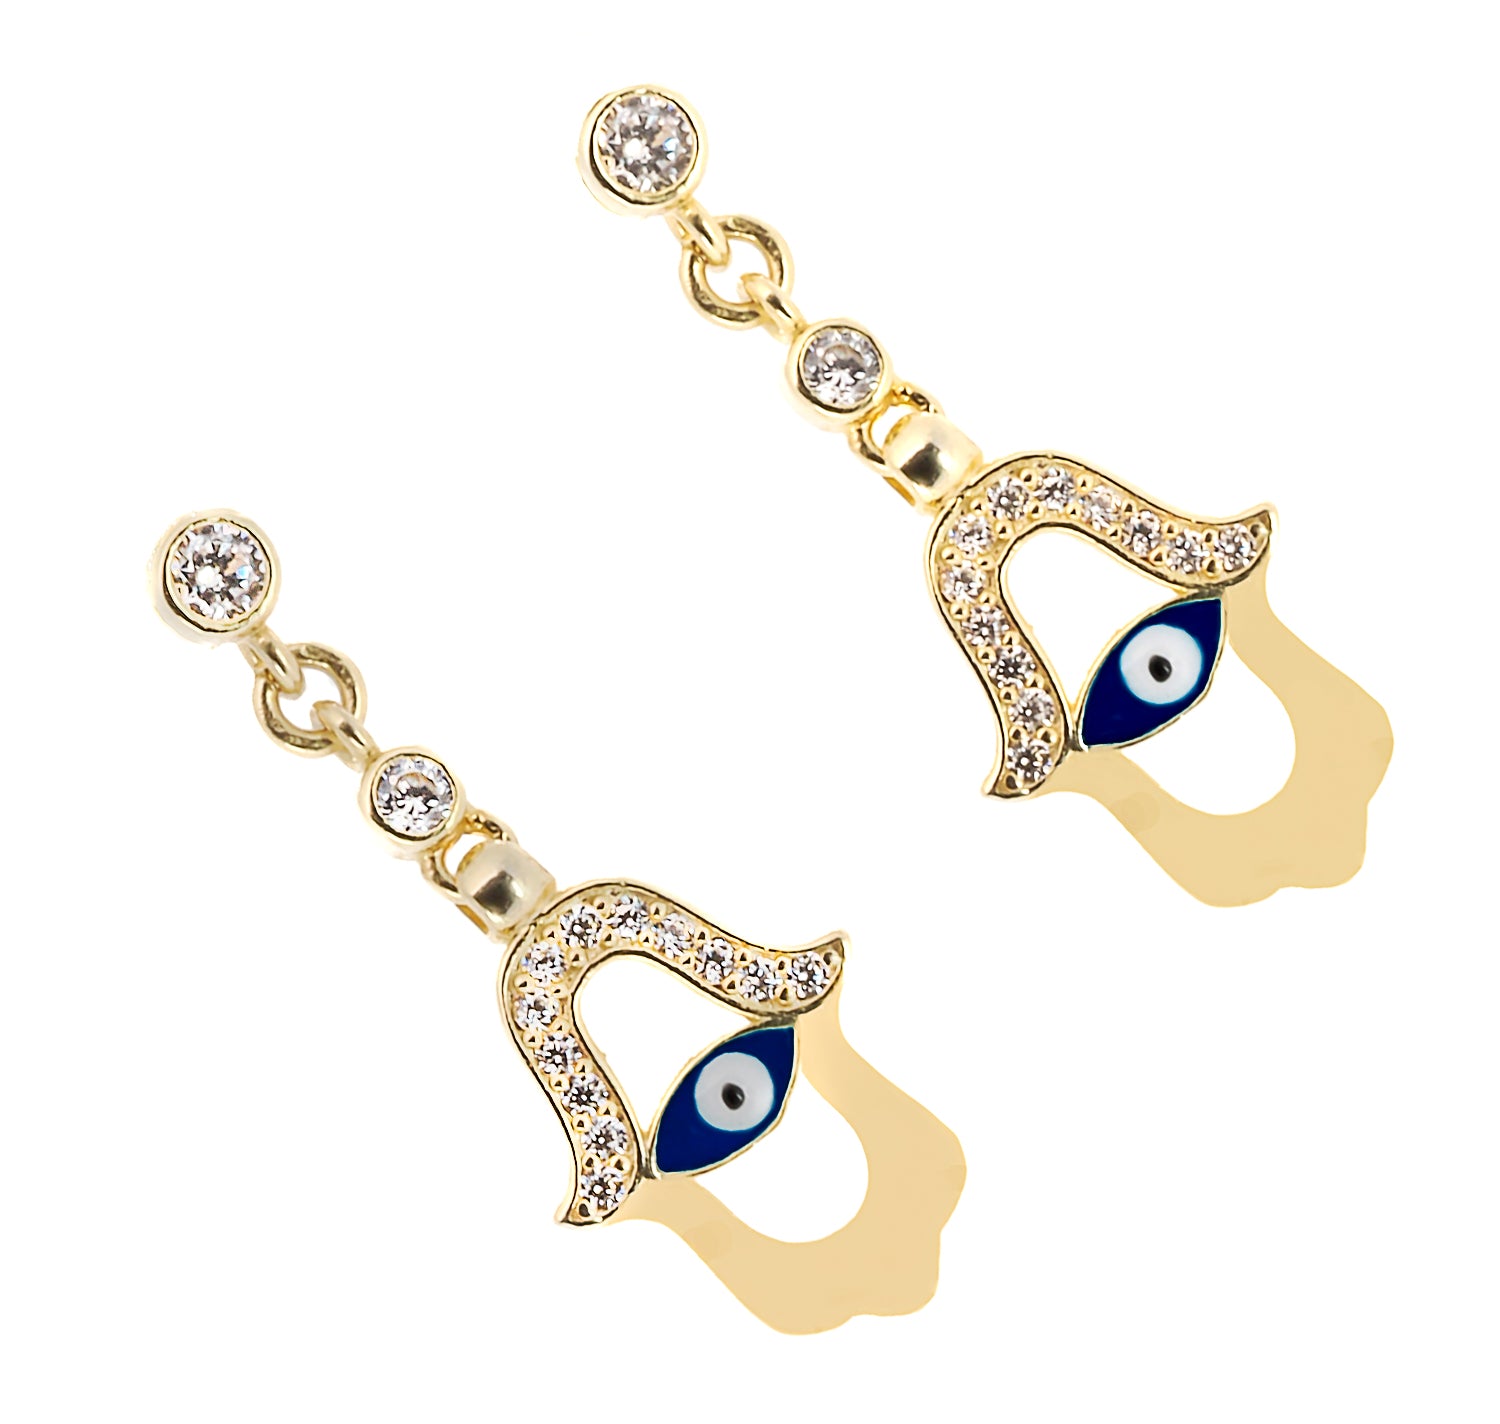 Symbolic Meaning - The Hamsa and Evil Eye charms combined for protection